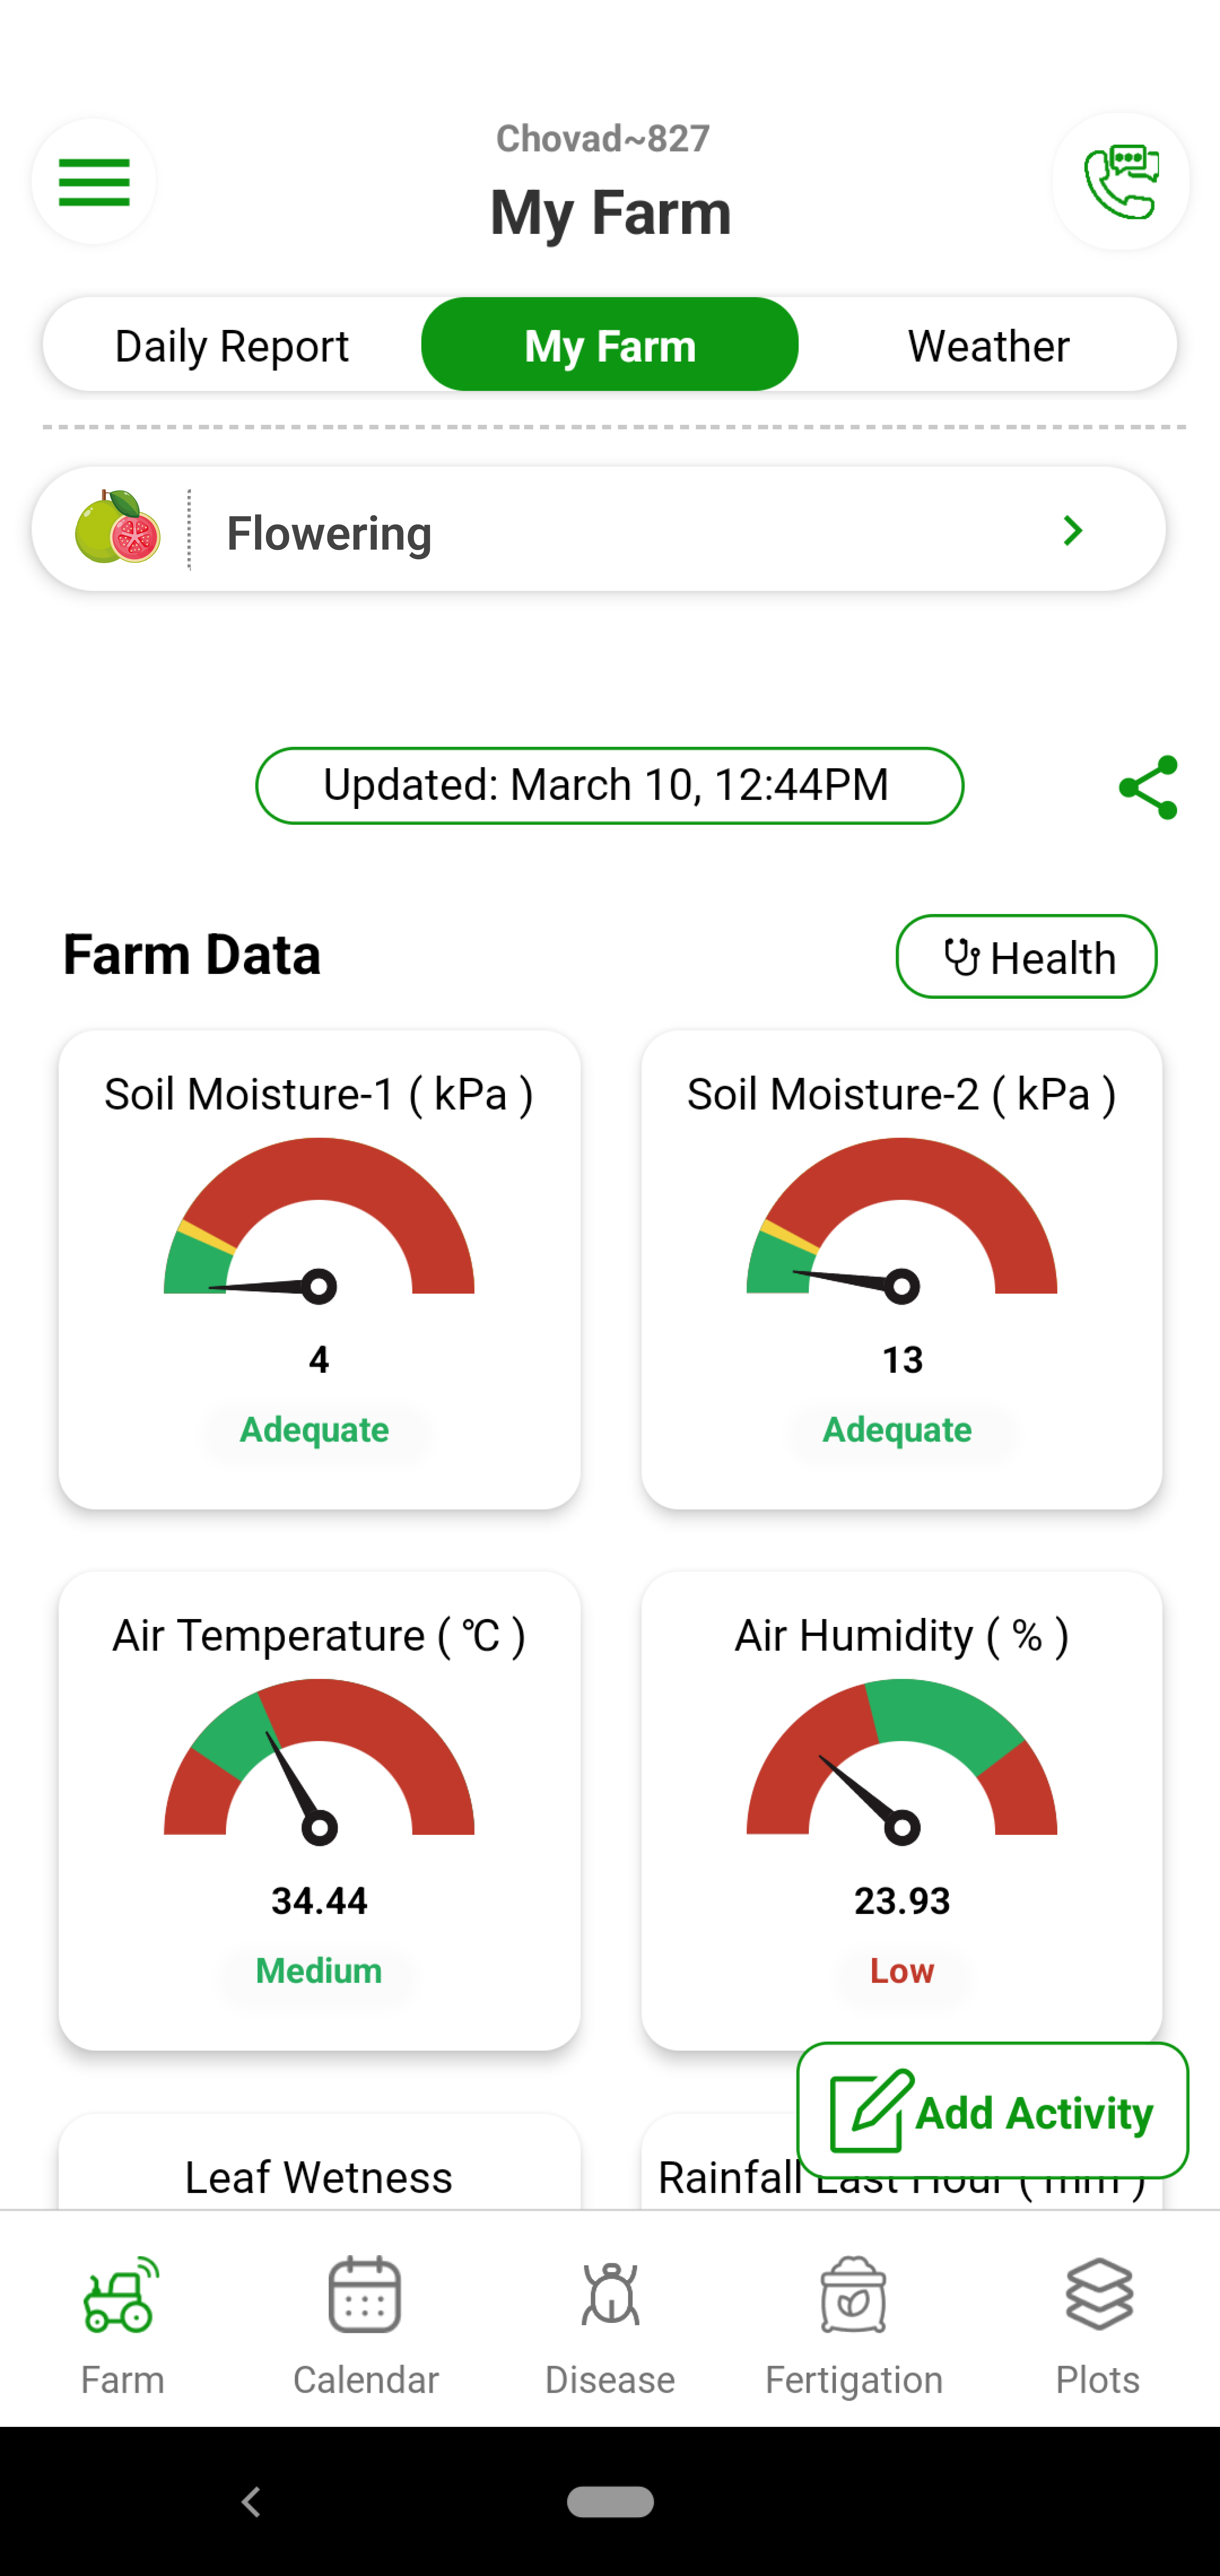 Fyllo device installed at your orchard monitors your farm 24*7 and captures 12 critical parameters in real time. You get this data on you mobile and dashboard in real time. You get to monitor where the crop is getting enough sunlight, proper temperature or humidity